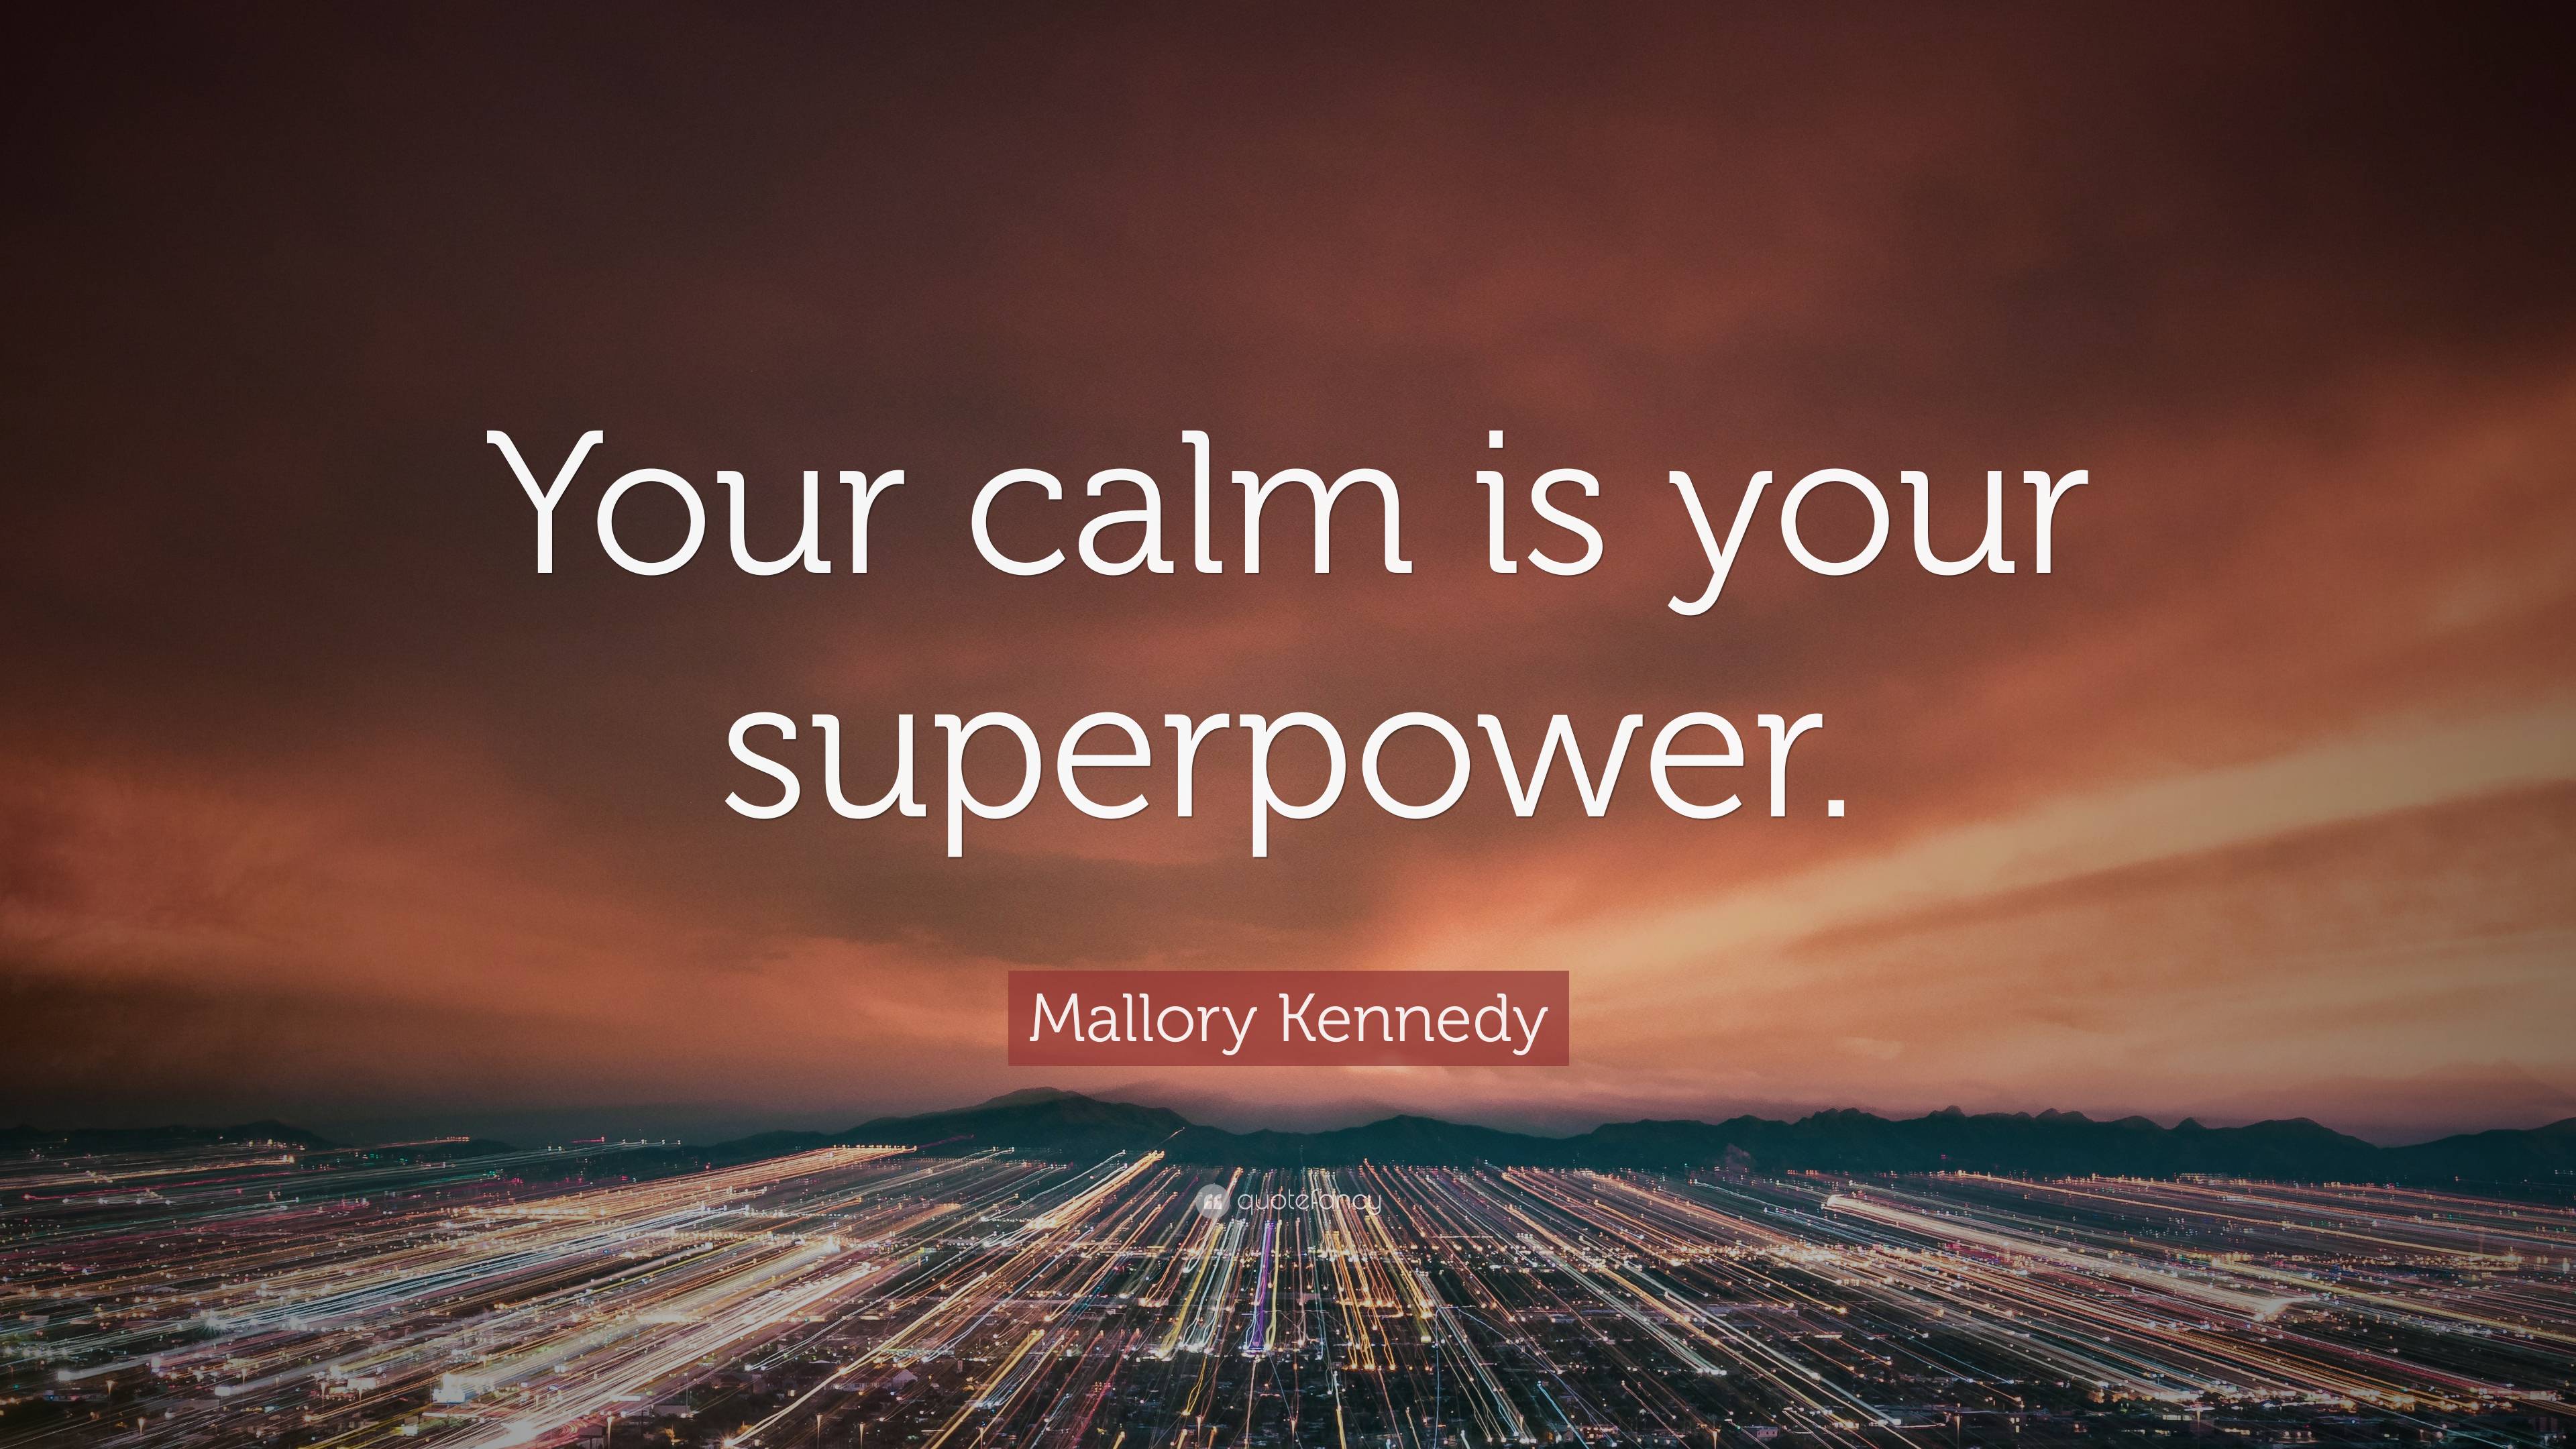 https://quotefancy.com/media/wallpaper/3840x2160/7557585-Mallory-Kennedy-Quote-Your-calm-is-your-superpower.jpg